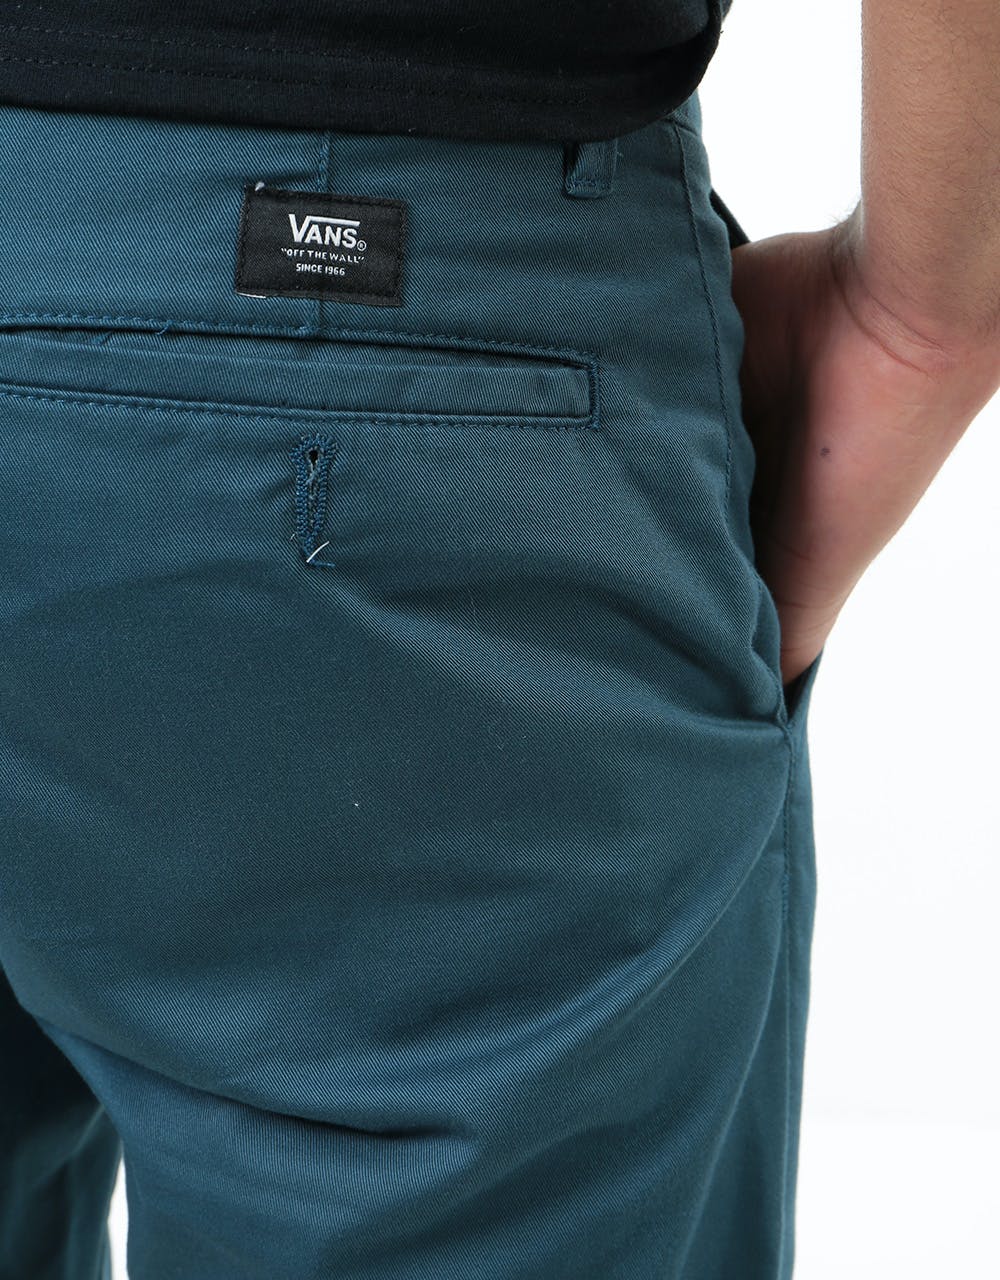 Vans Authentic Chino Stretch Trousers - Stargazer